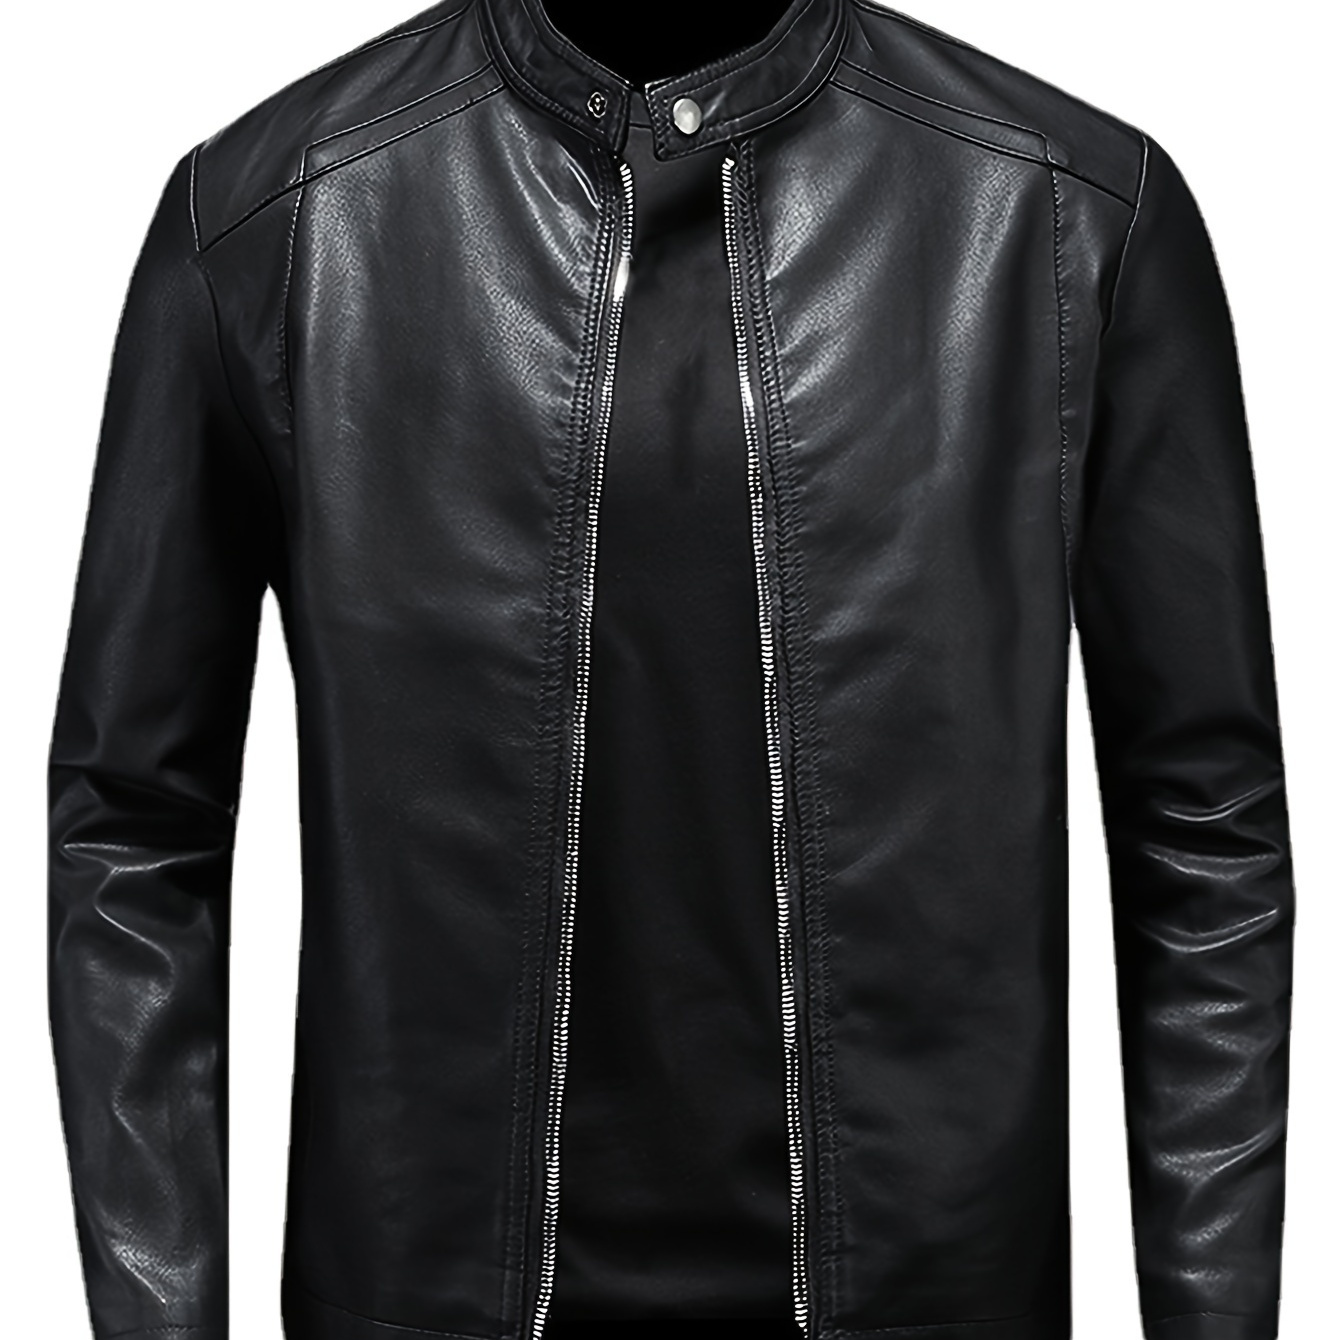 

Men's Casual Leather Jacket, Stand Collar, Zippered Pockets, Classic Motorcycle Style Outerwear